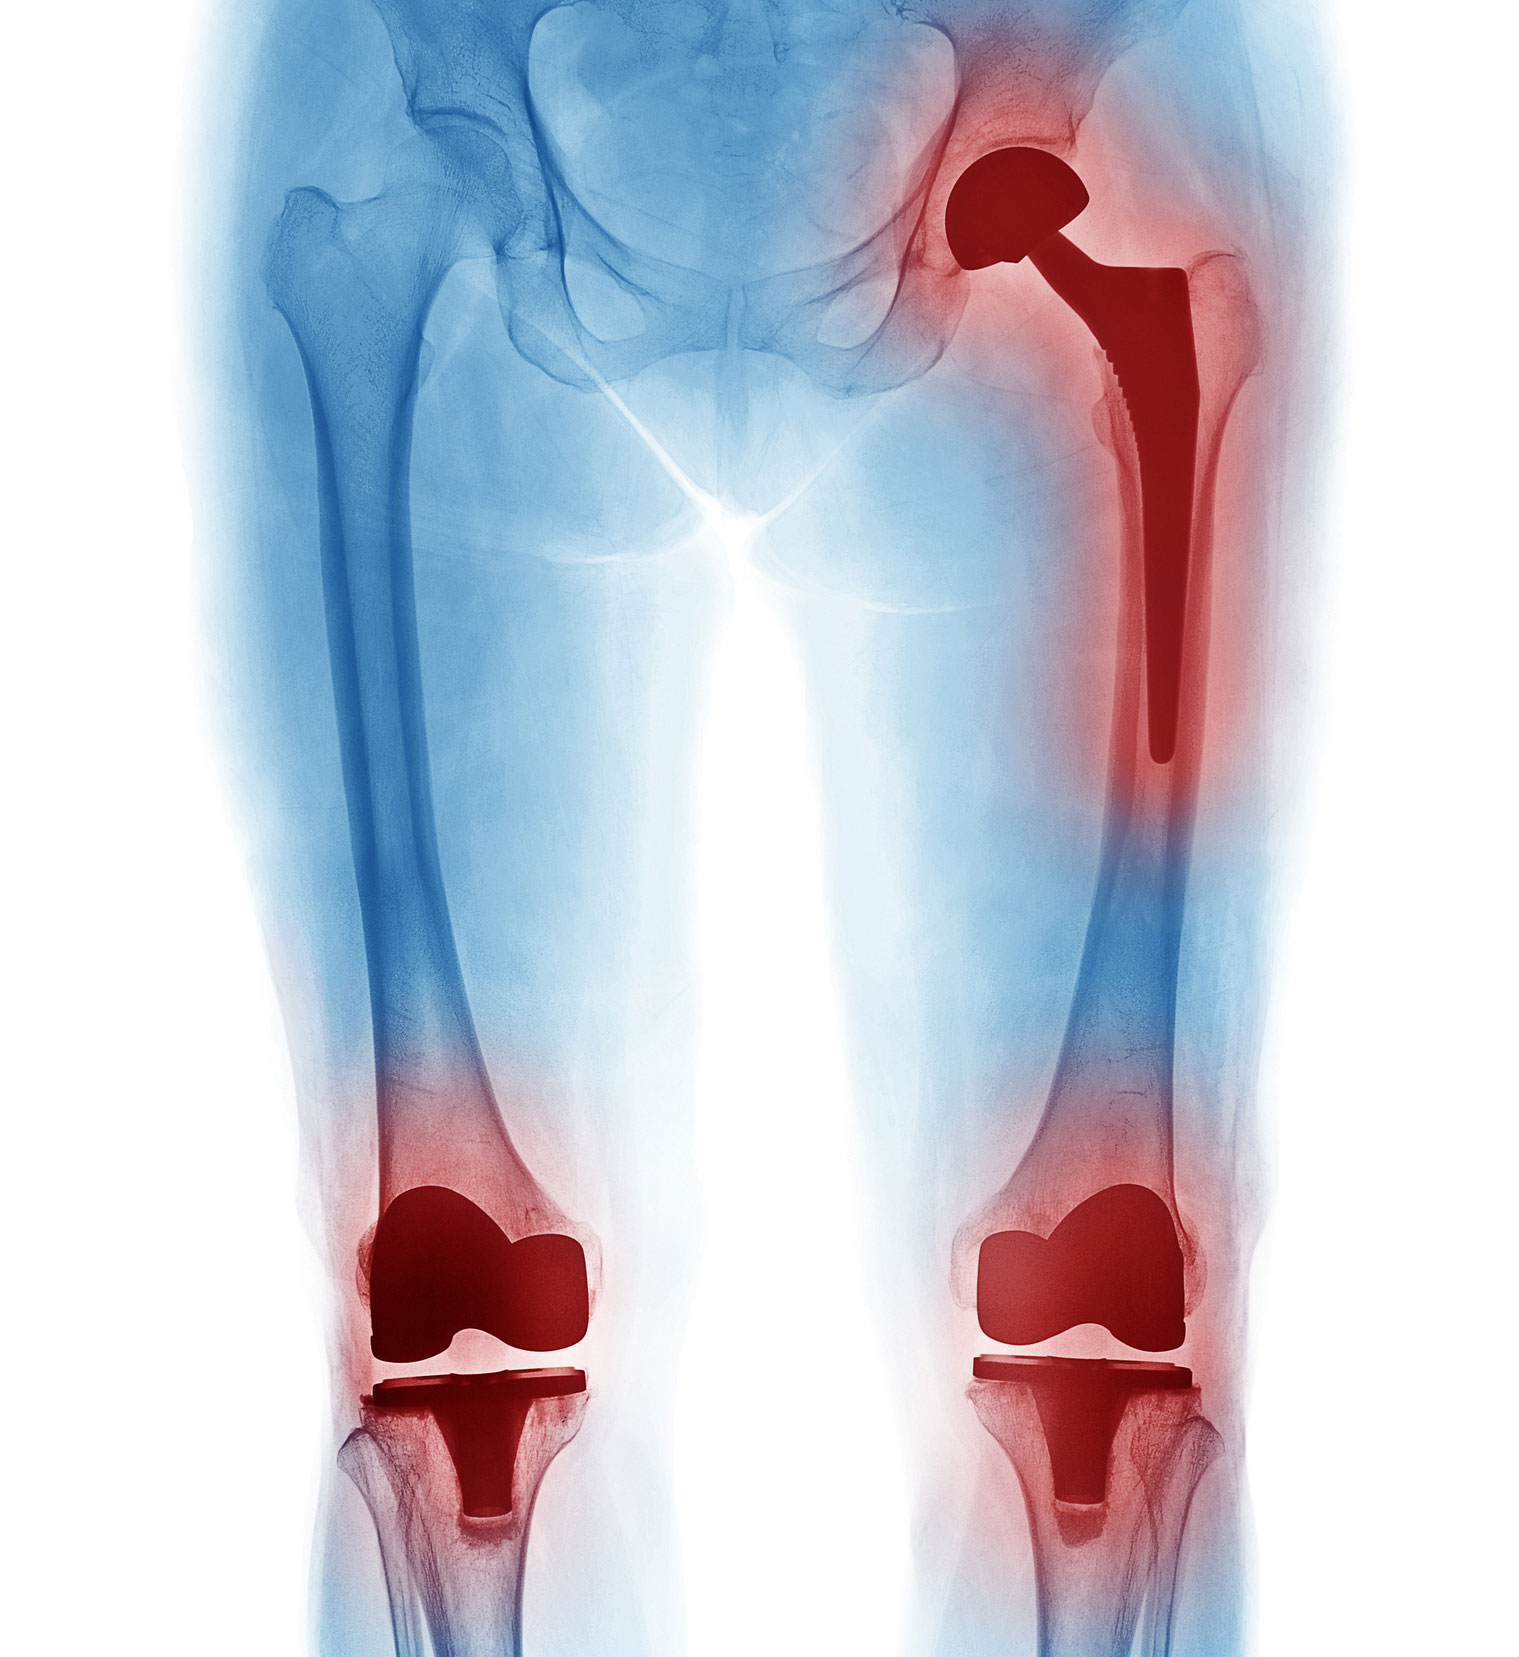 Joint Replacement Lifespan